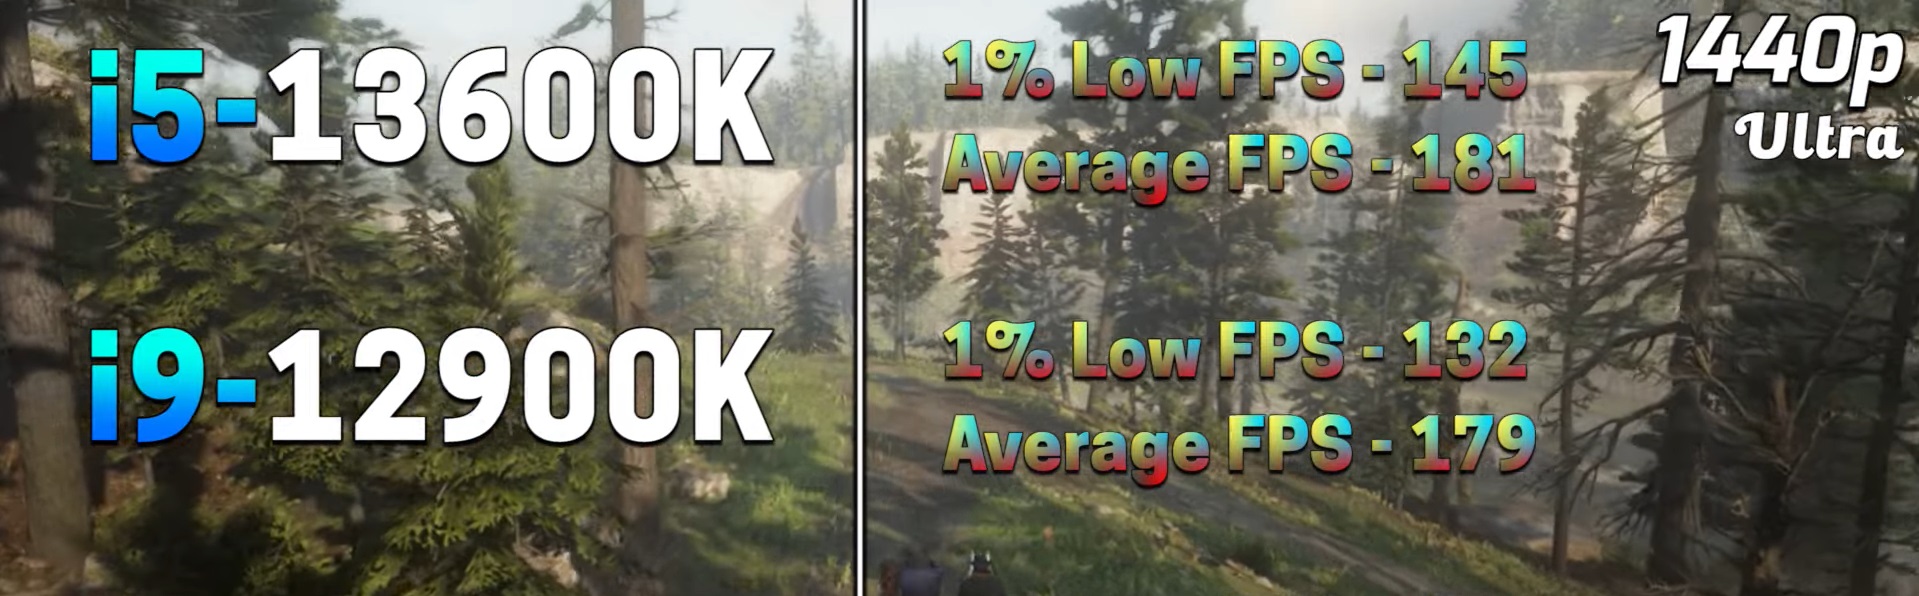 Red Dead Redemption 2 1440p benchmark